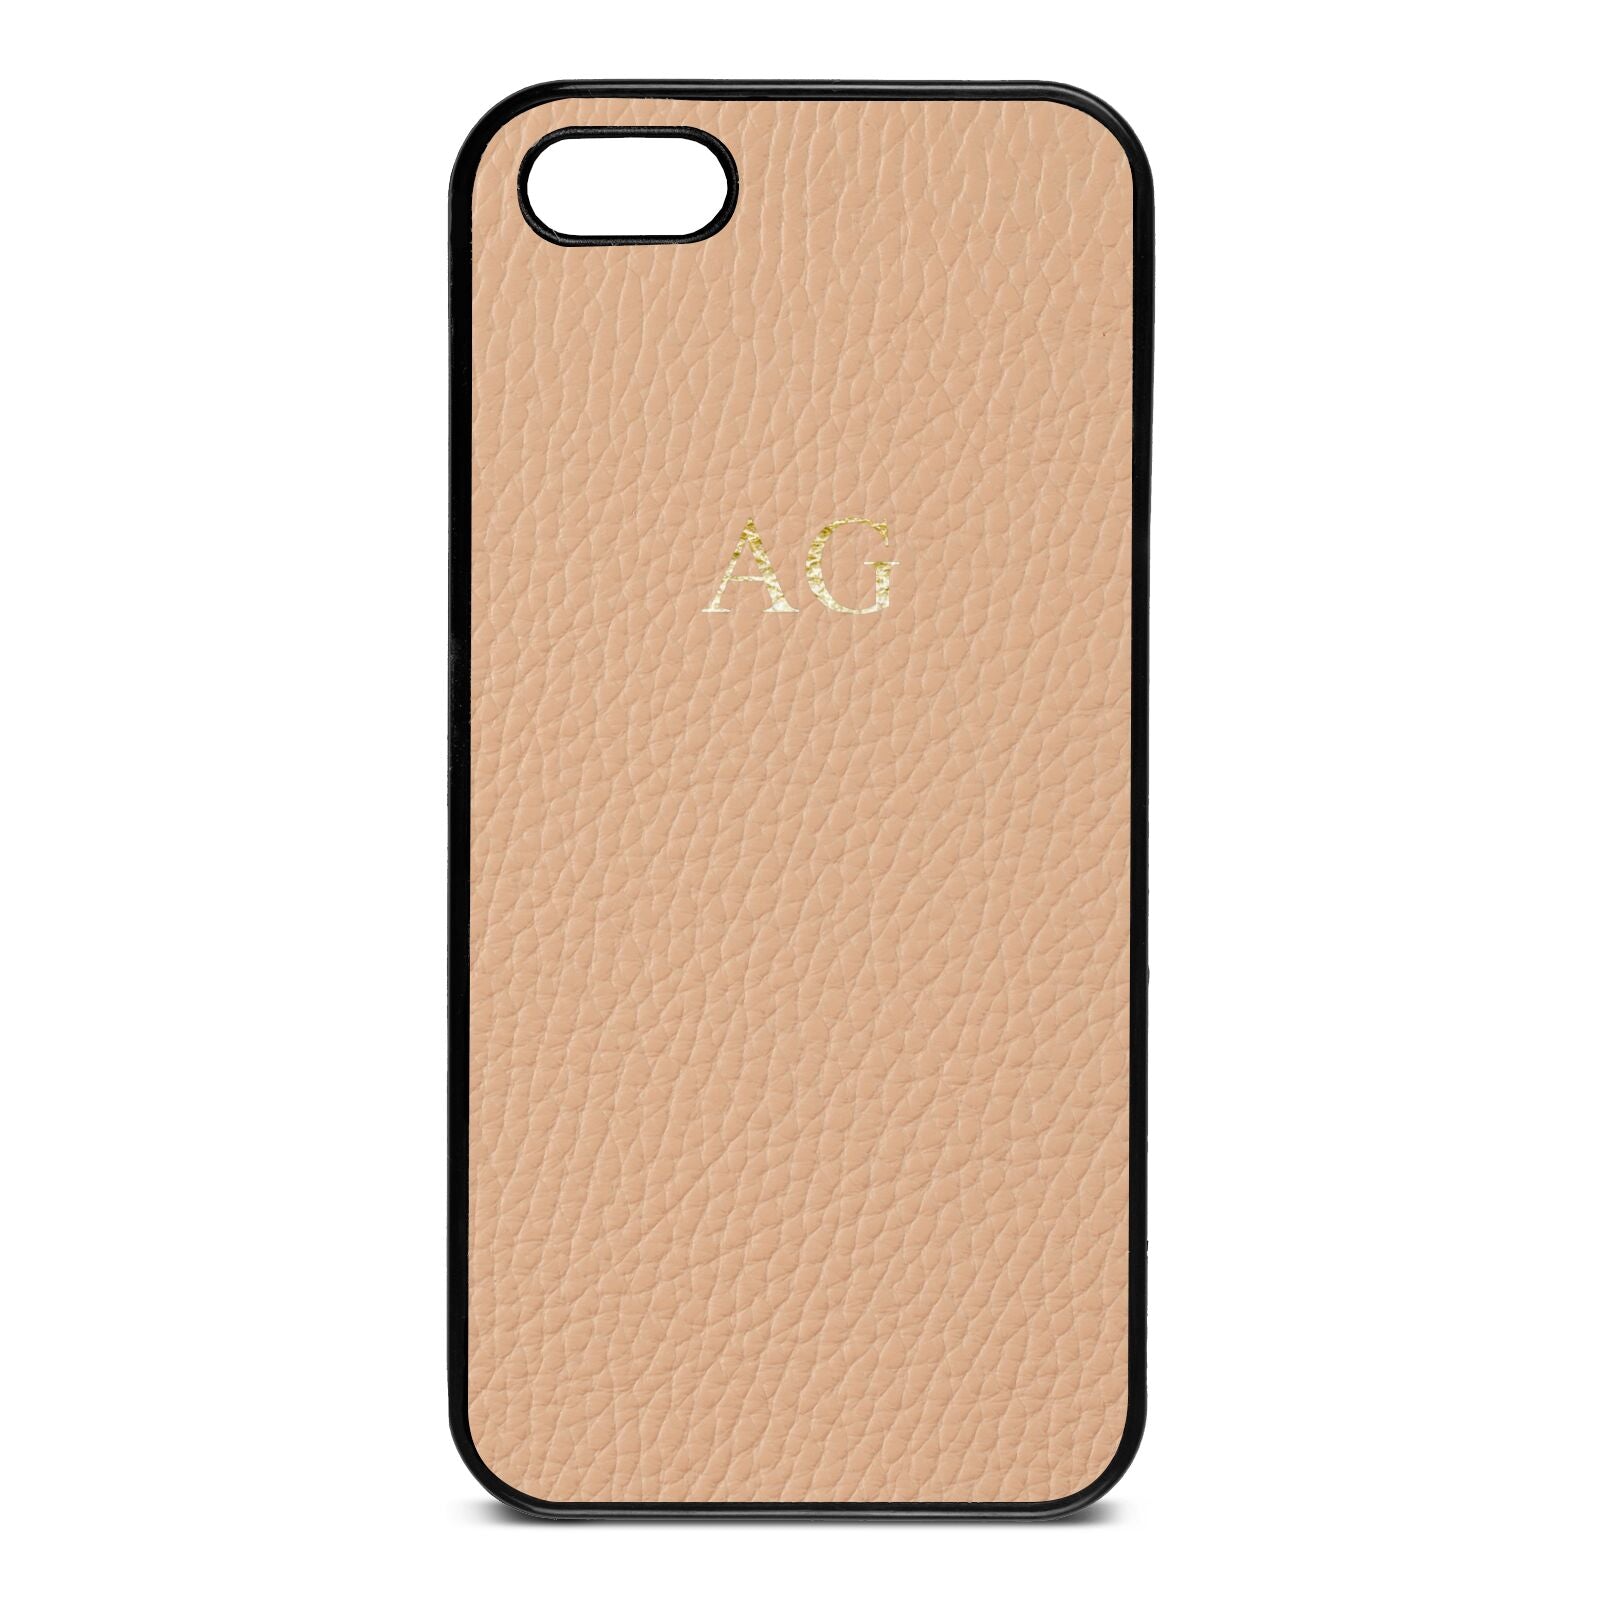 Personalised Nude Pebble Leather iPhone 5 Case